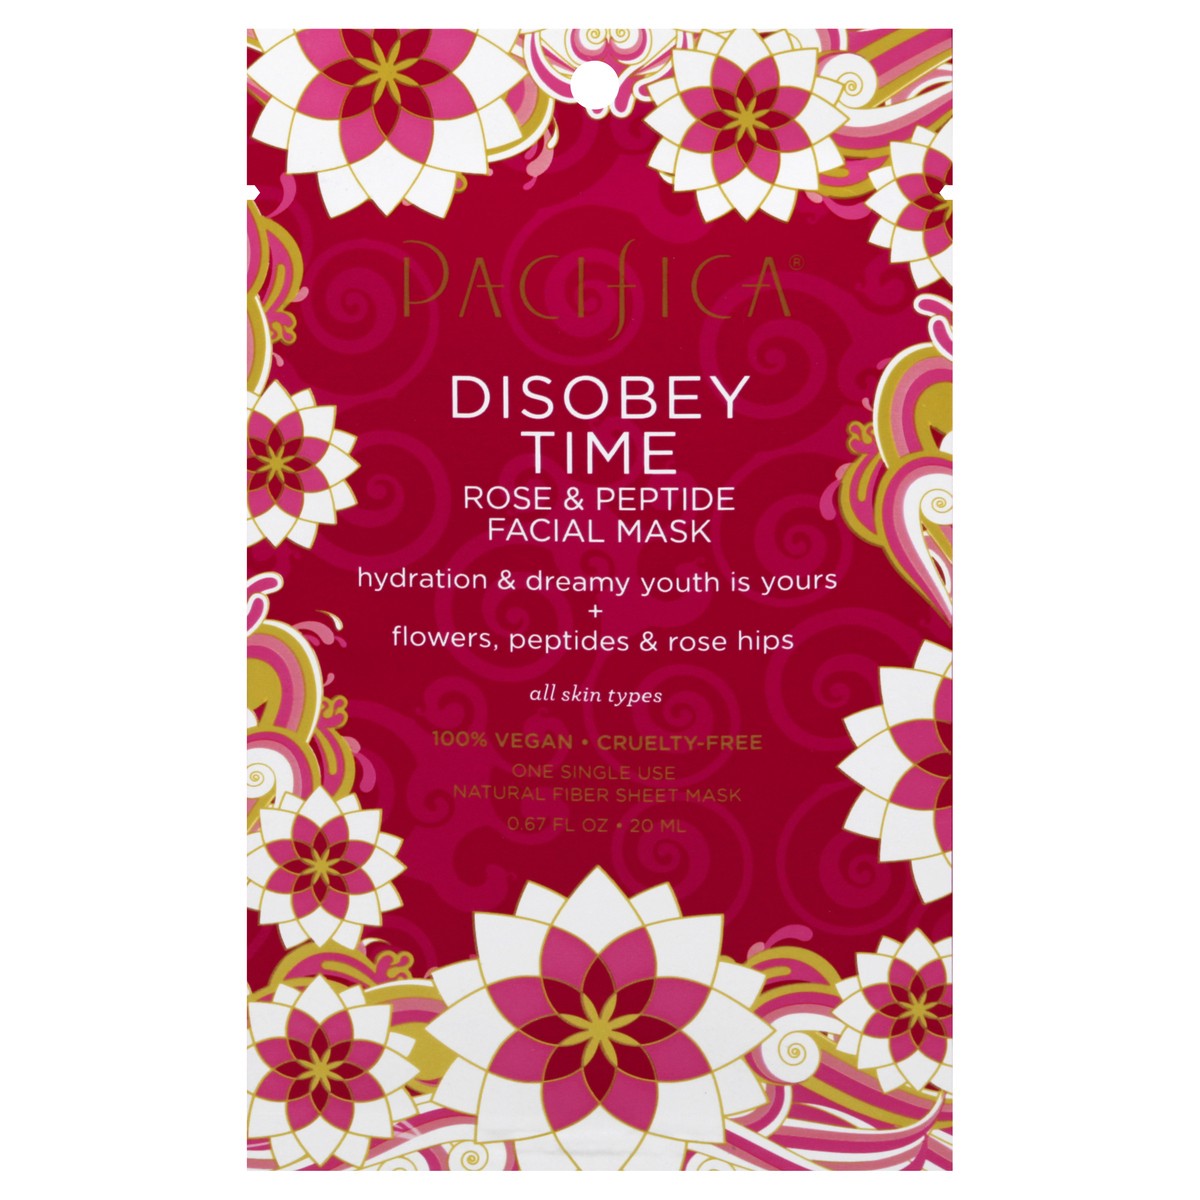 slide 1 of 9, Pacifica Rose & Peptide Disobey Time Facial Mask 0.67 oz, 0.67 oz